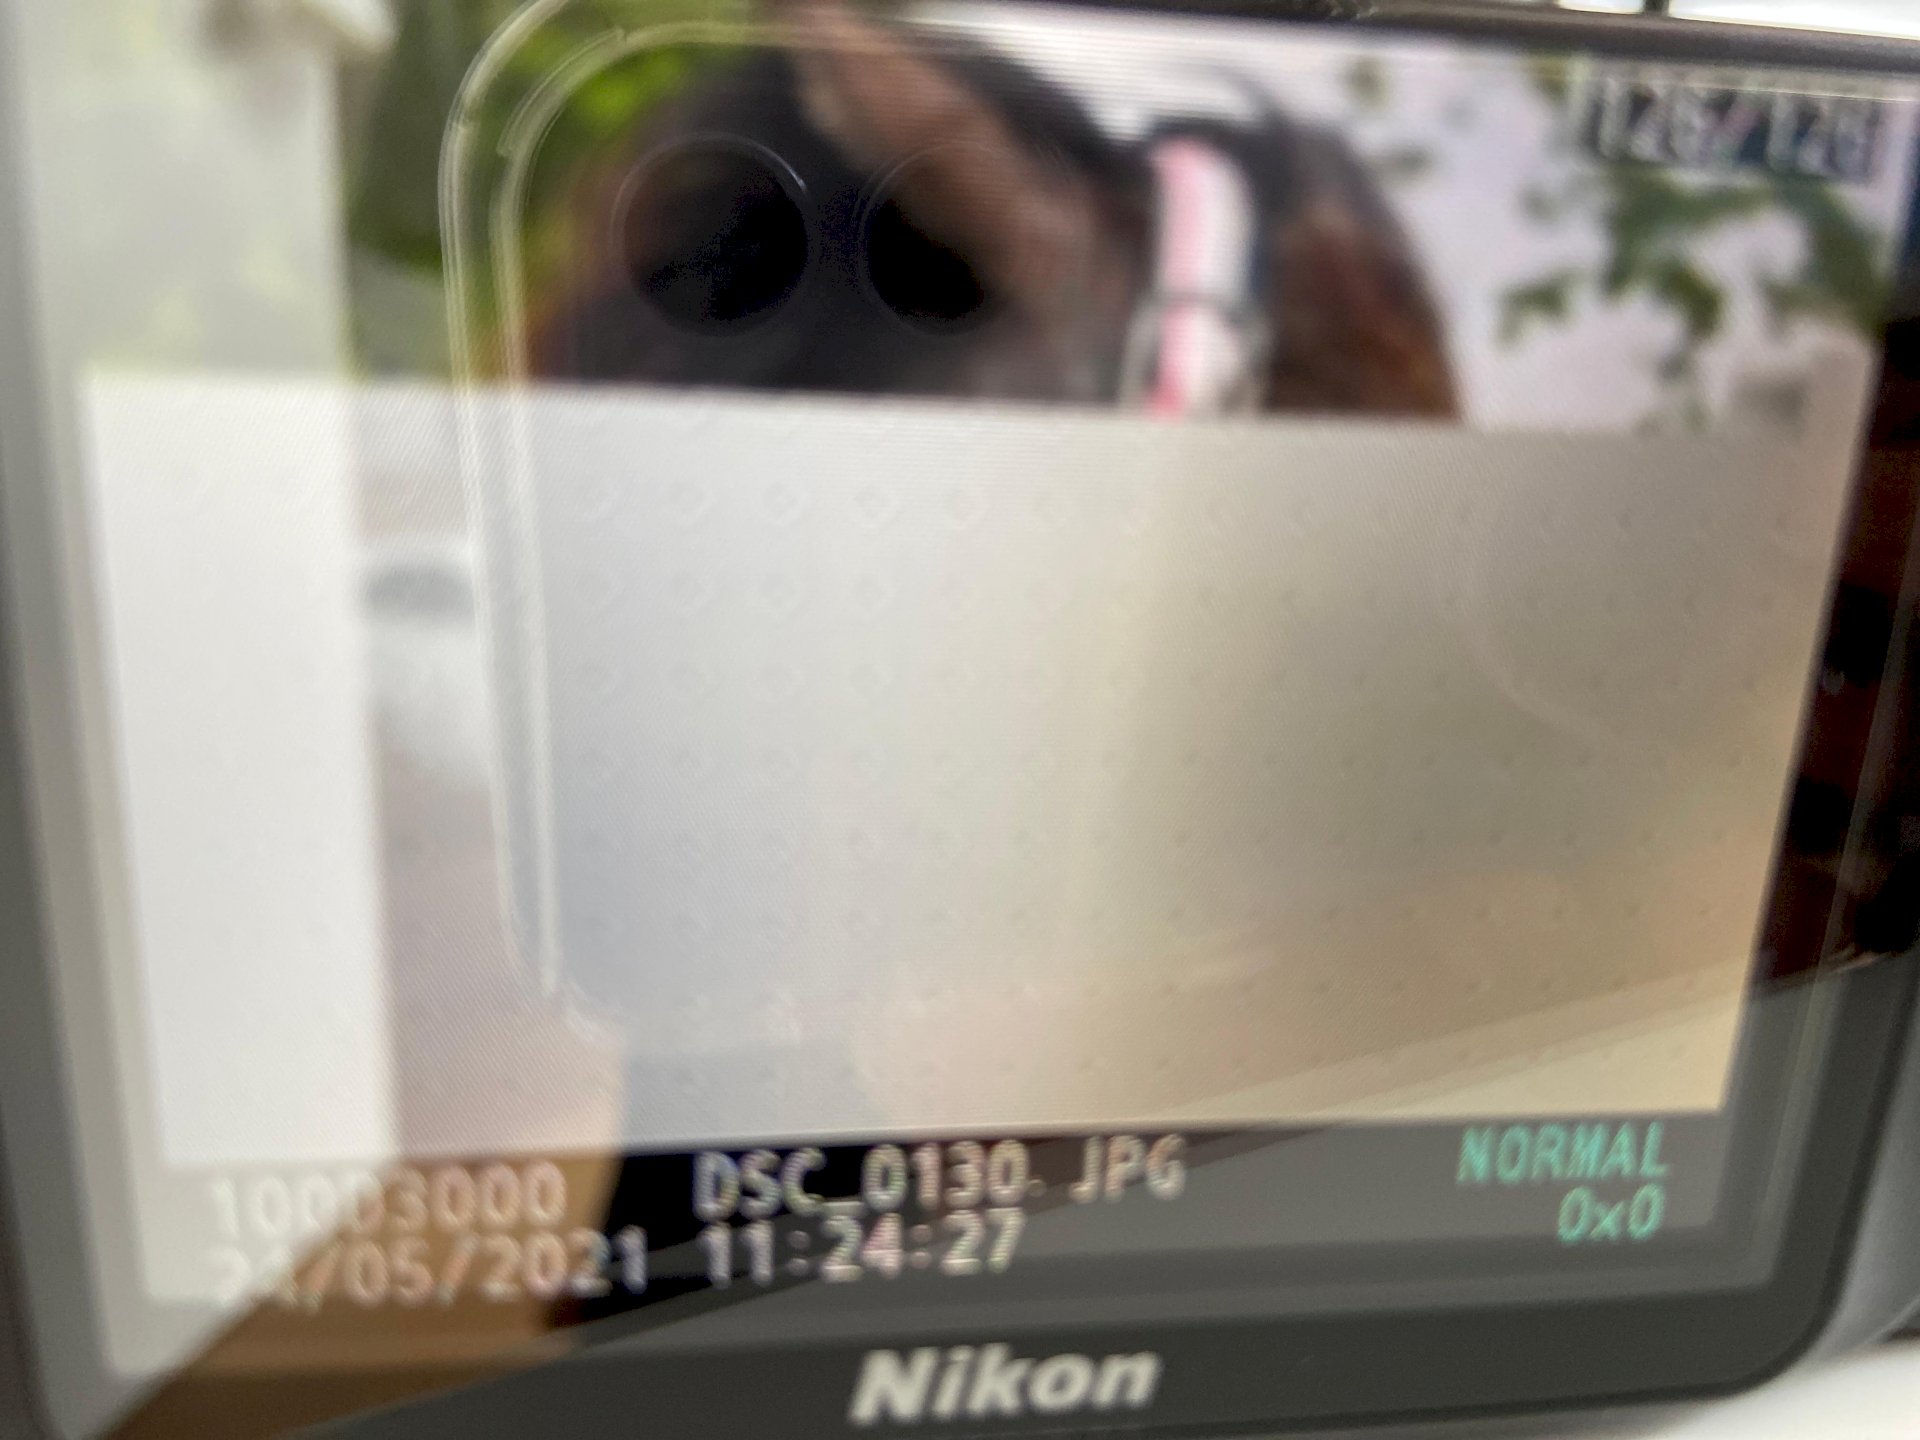 Nikon camera pictures are missing